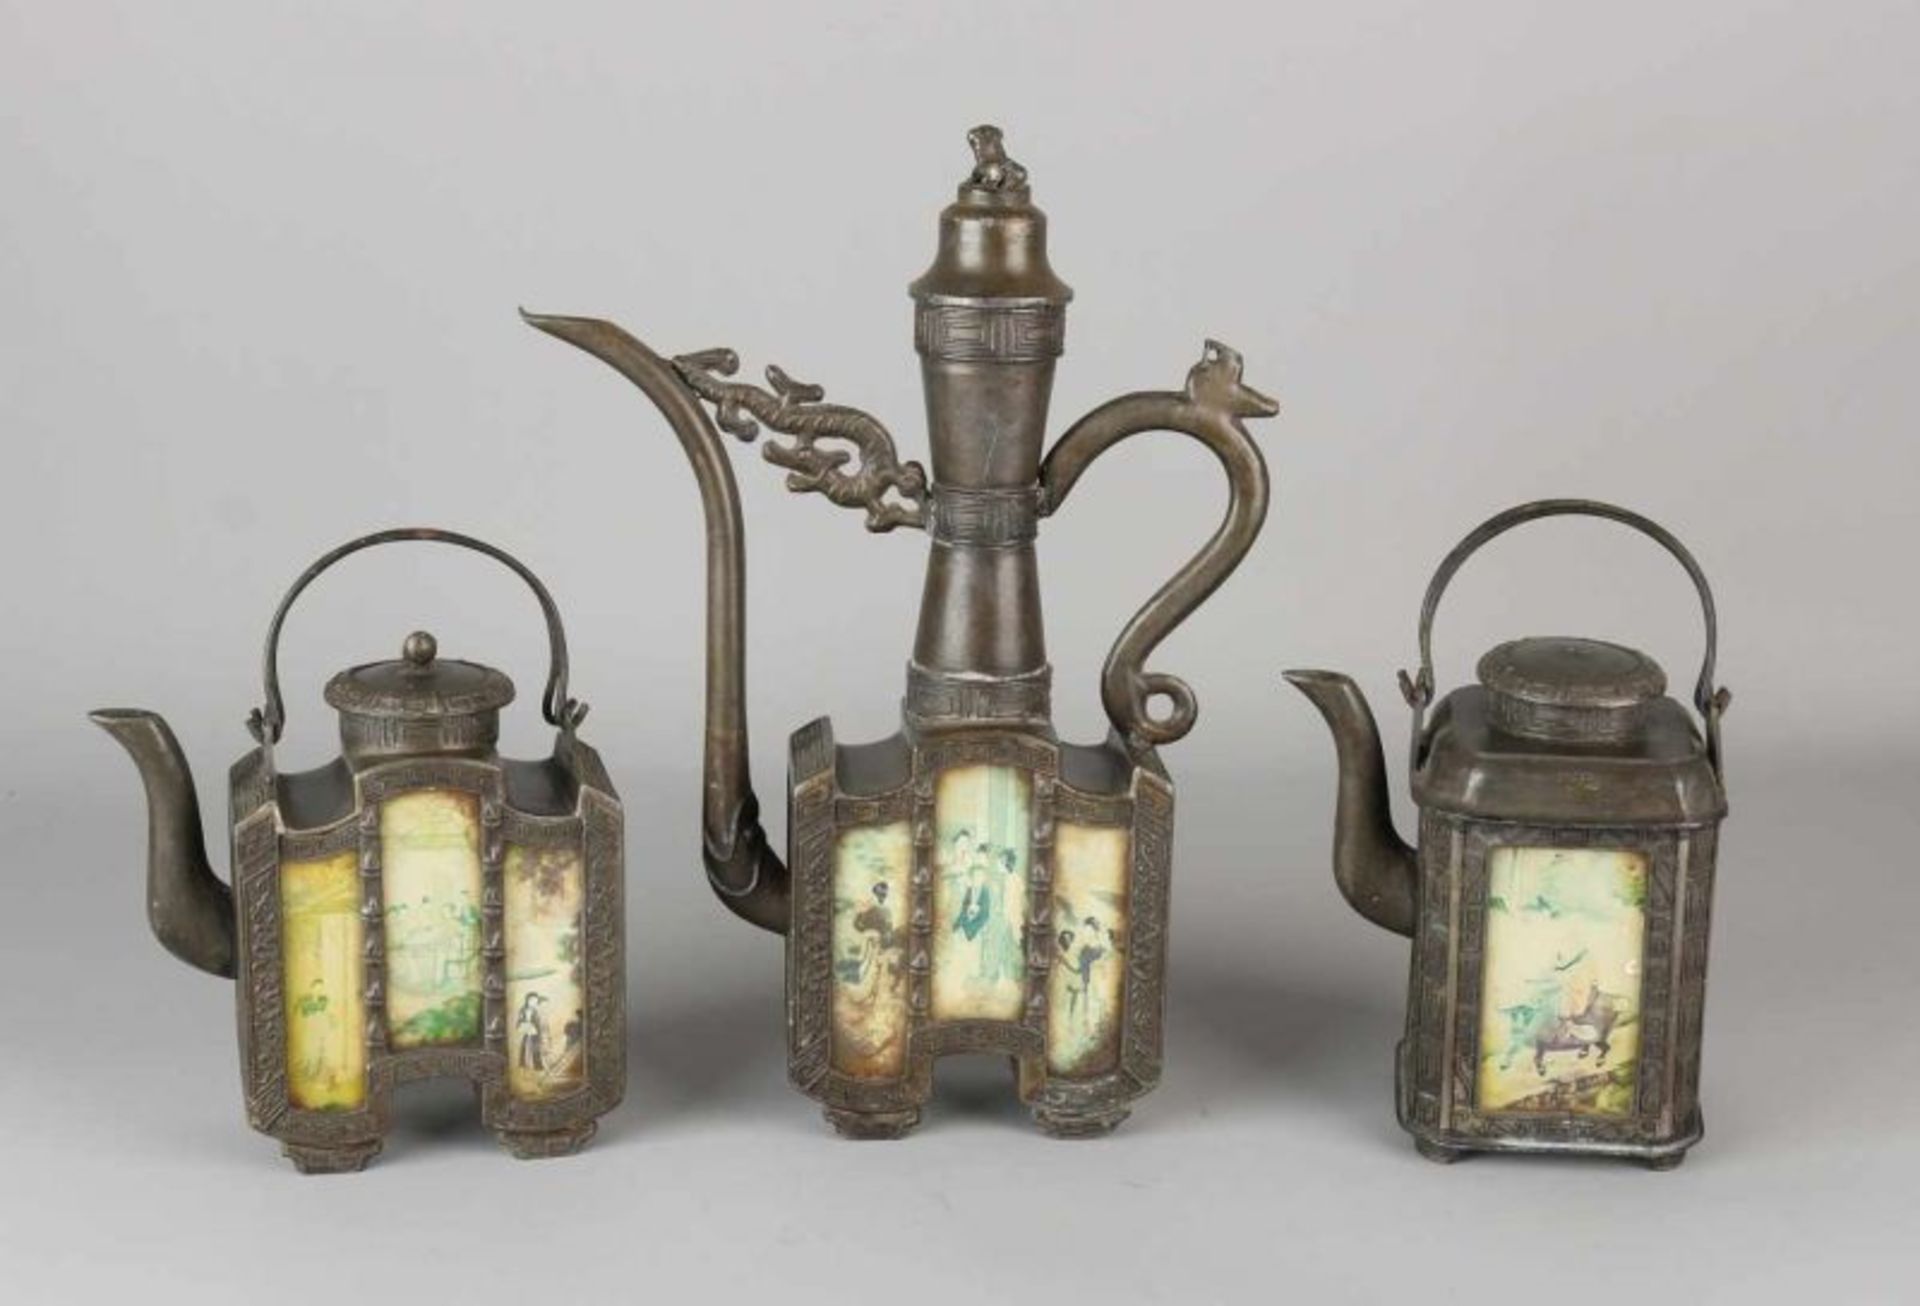 Three ancient Chinese metal teapots with lithographs. Dimensions: H 20-30 cm. In reasonable / good